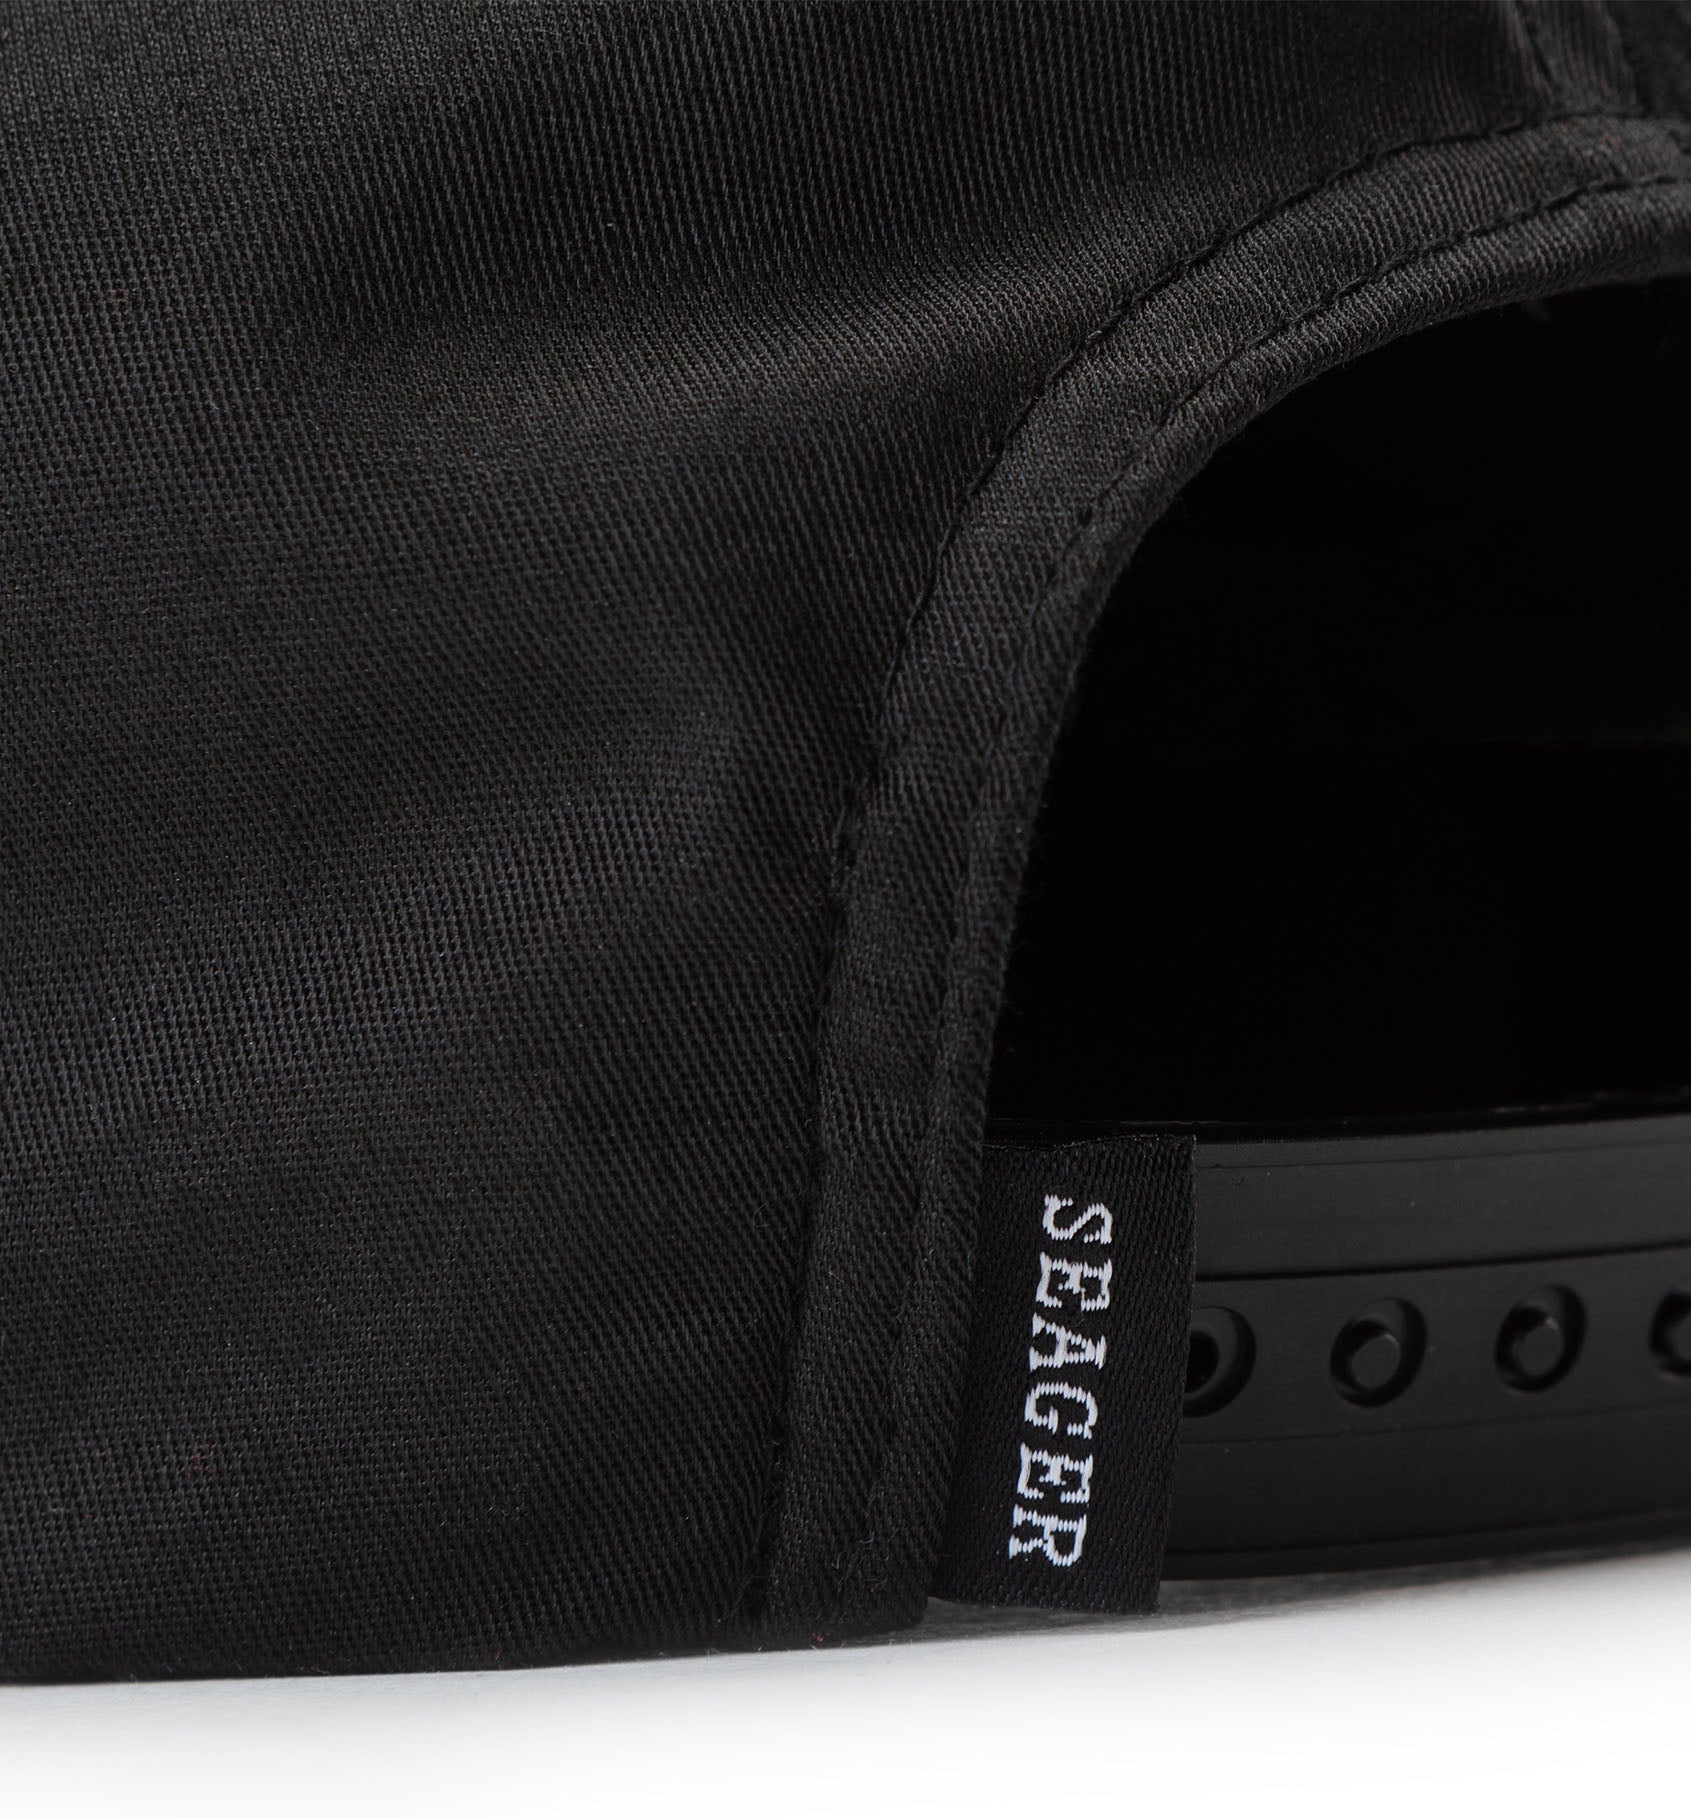 Seager x Waylon Jennings Country Snapback Black | Seager Co.